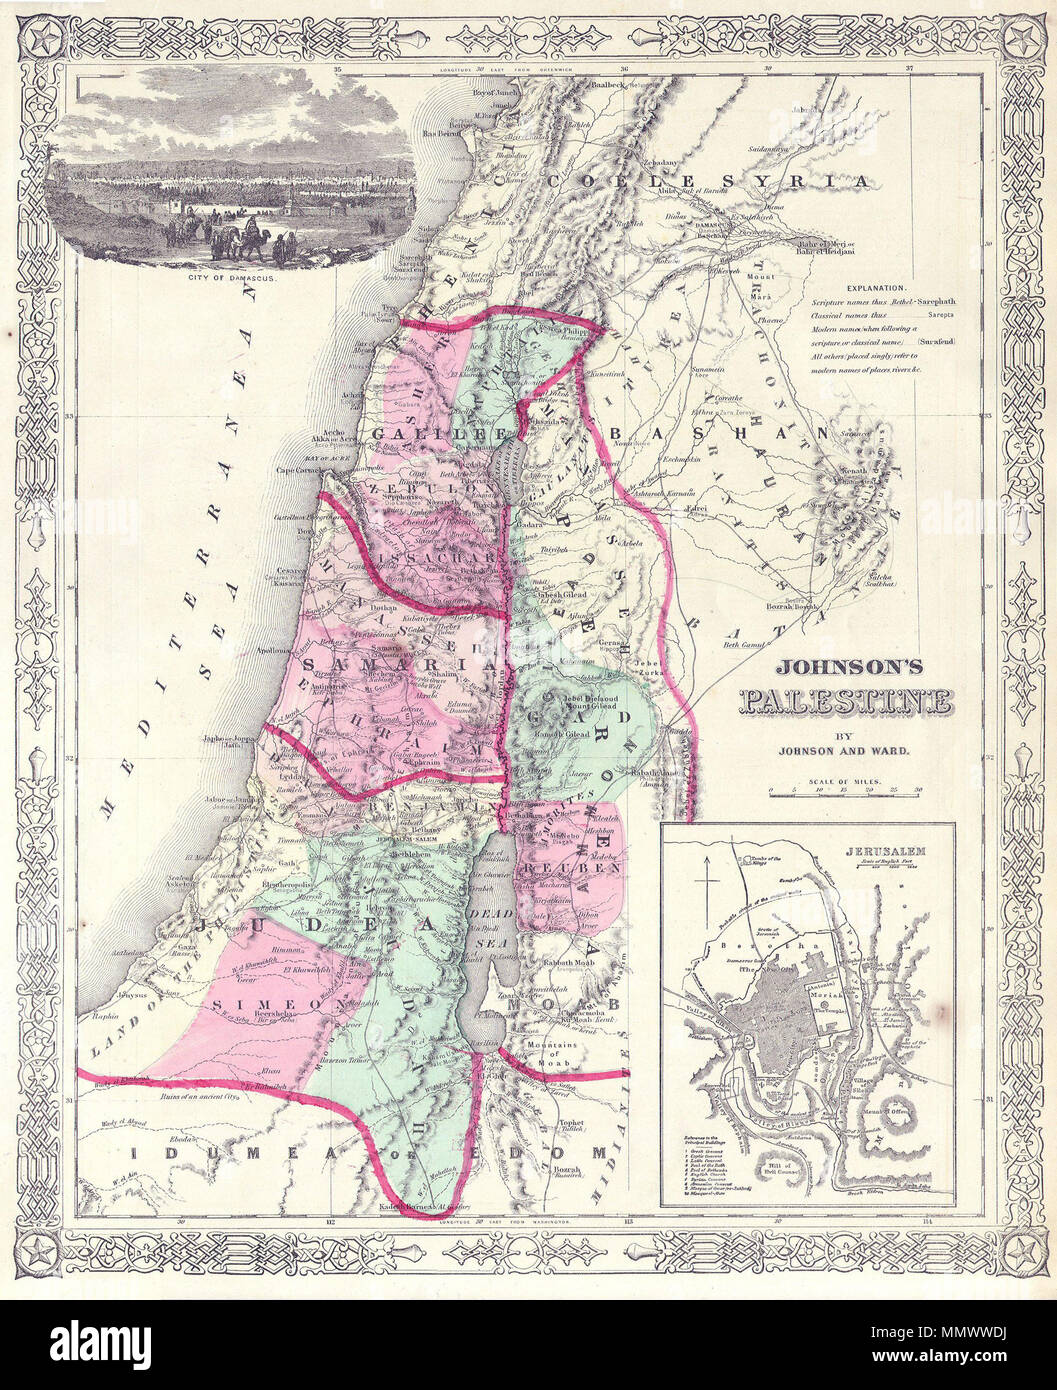 .  English: This is a beautiful hand colored map of Israel, Palestine, or the Holy Land. Map details cities, roads, biblical and historical sites with color coding at the regional level. Where appropriate alternate place names taken from the Arabic are noted. Topography shown by hachure. An inset map of Jerusalem appears in the lower right quadrant with all principal buildings noted. The upper left quadrant features an engraved view of Damascus. Features the fretwork style border common to Johnson’s atlas work from 1864 to 1869. Published by A. J. Johnson and Ward as plate no. 93 in the 1864 e Stock Photo